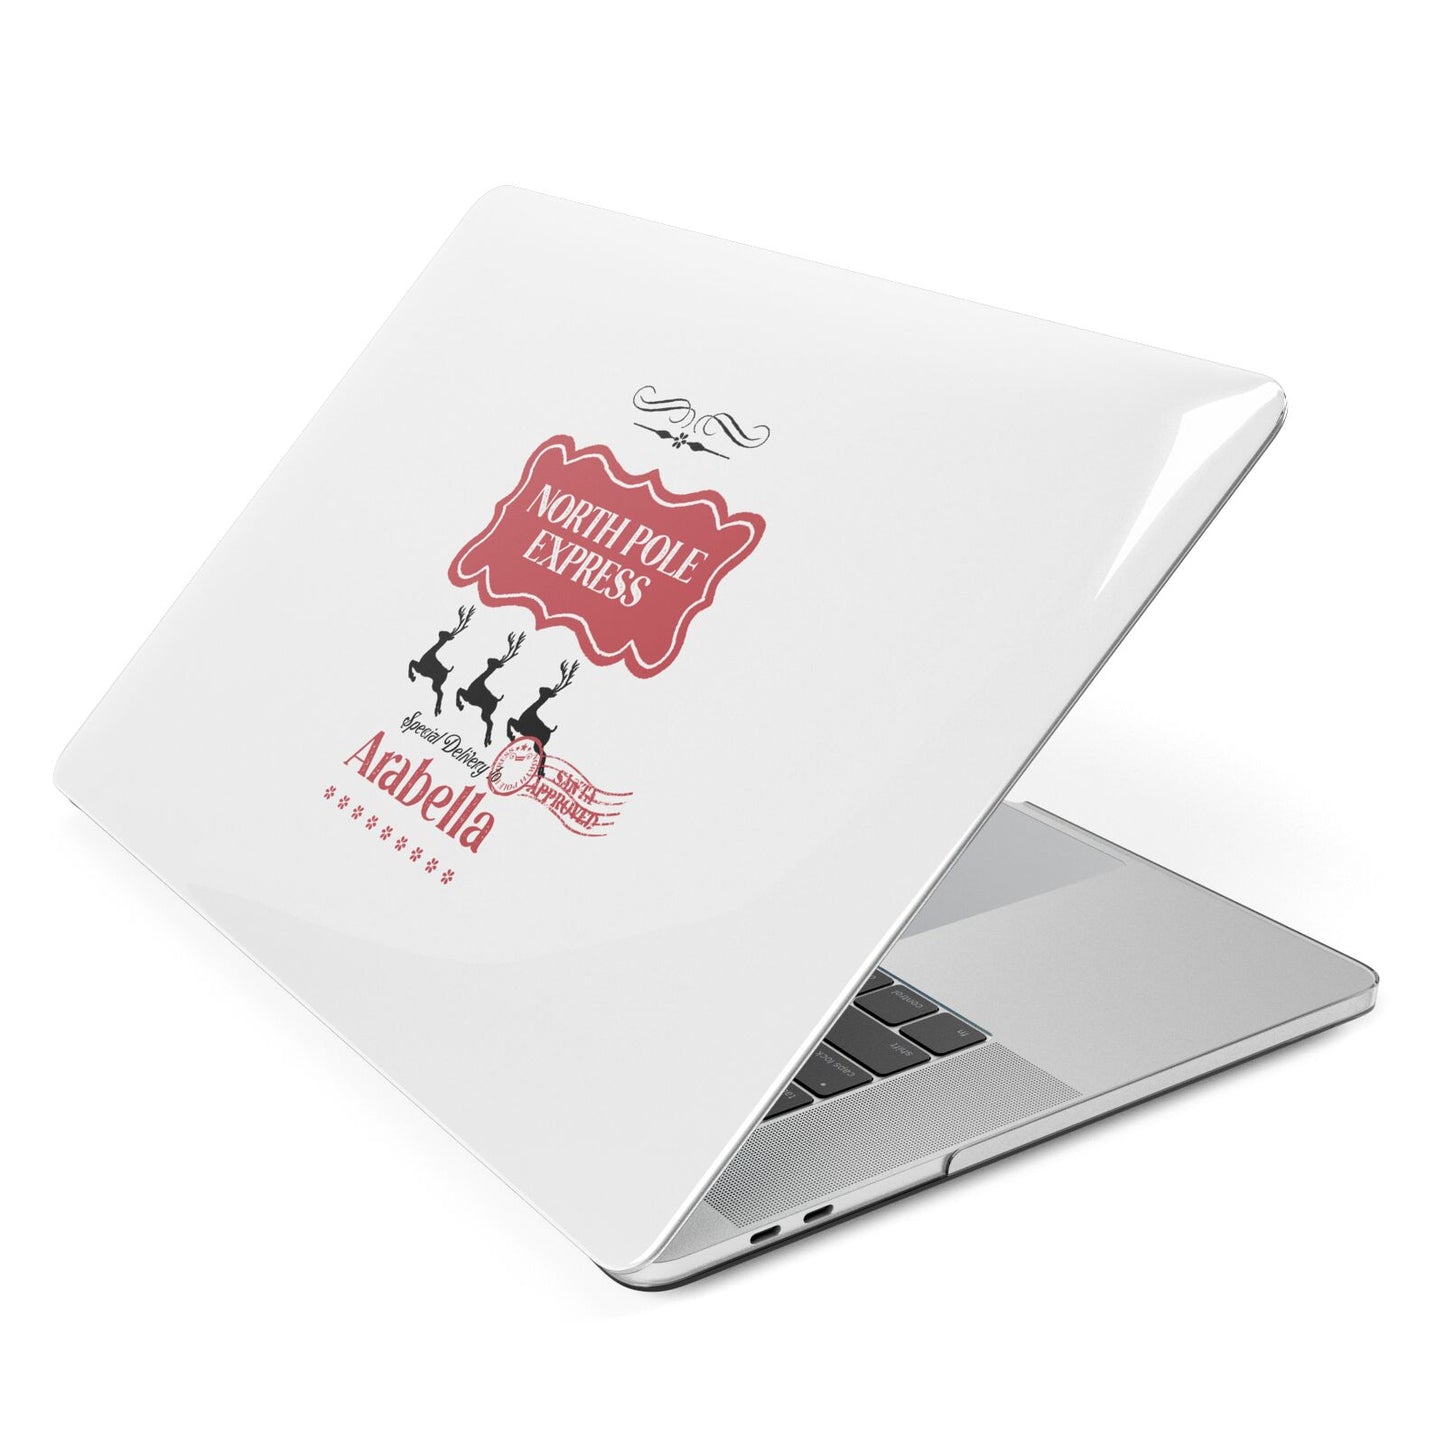 North Pole Express Personalised Apple MacBook Case Side View